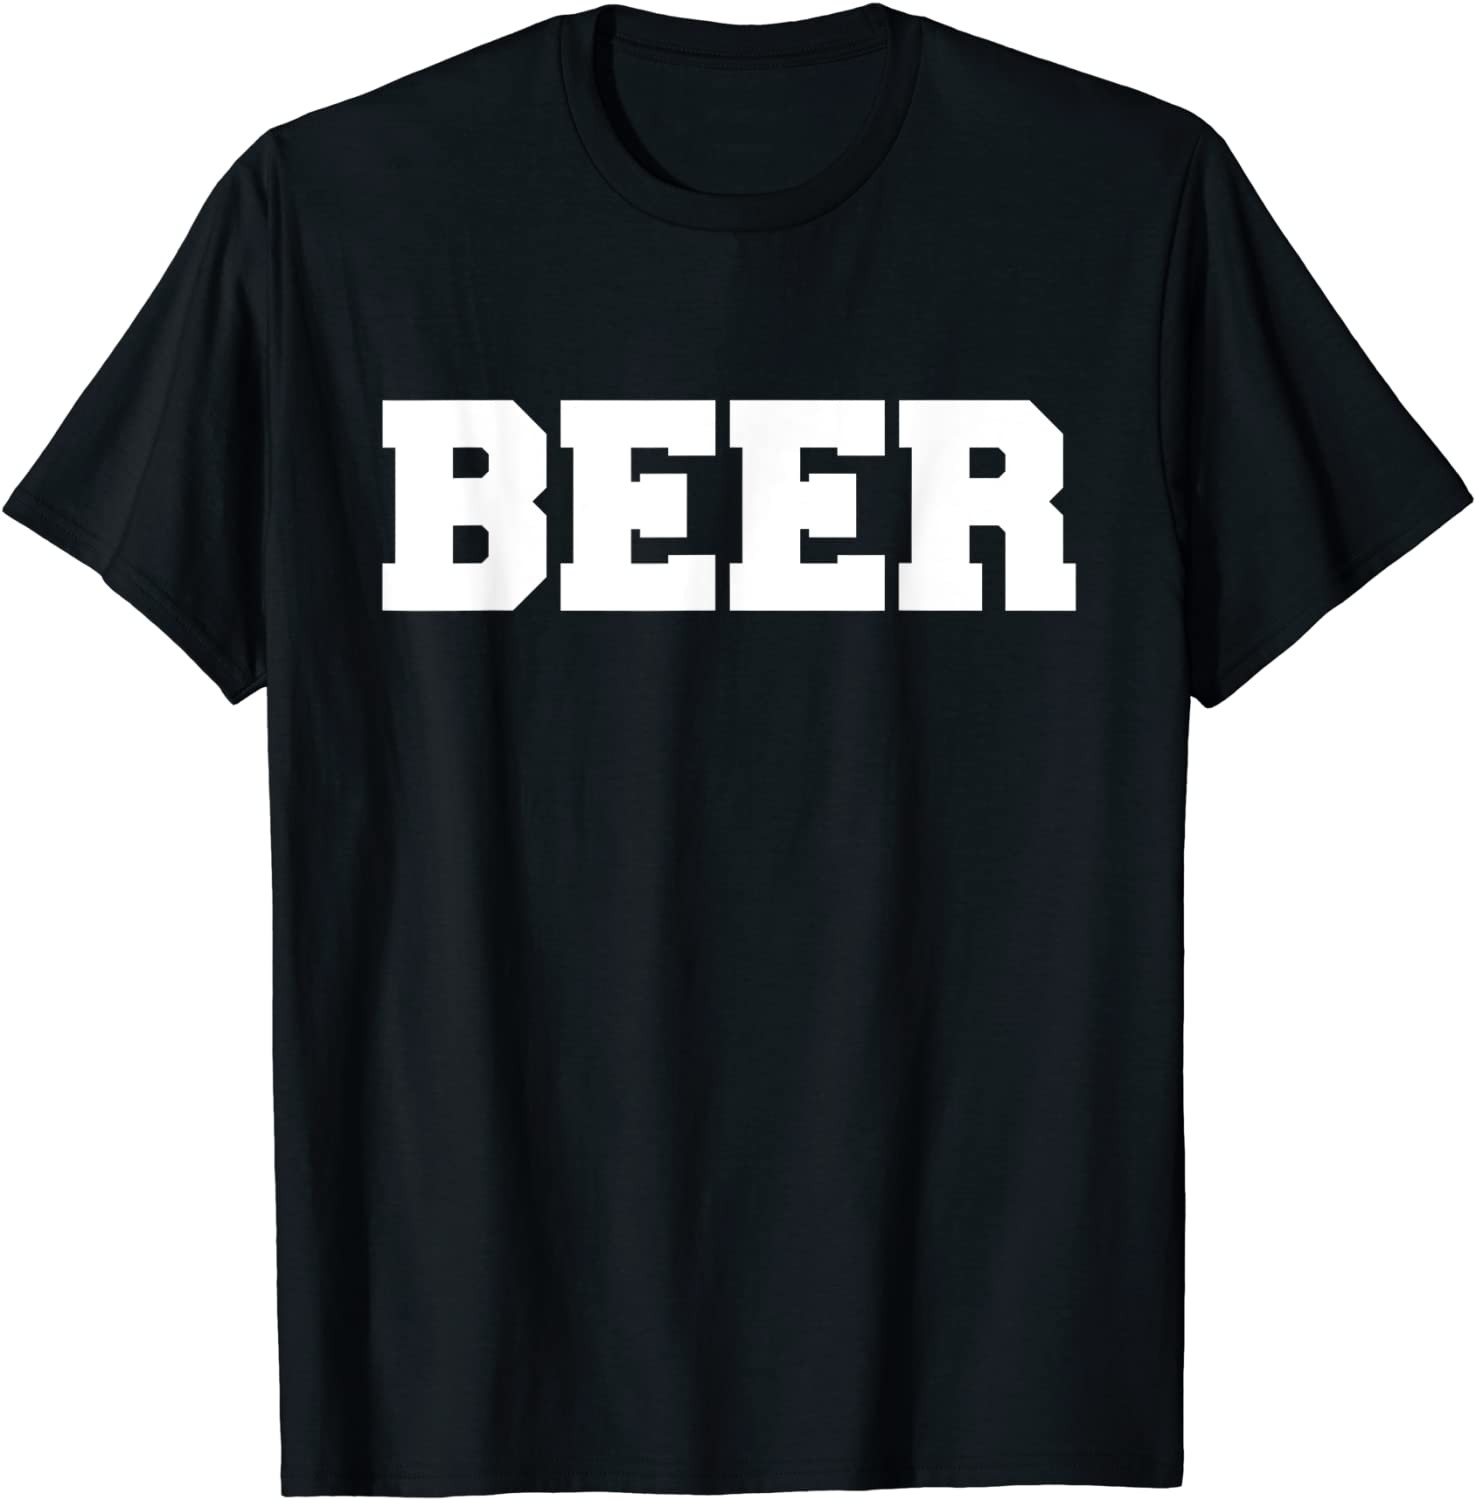 That Just Says BEER T-Shirt